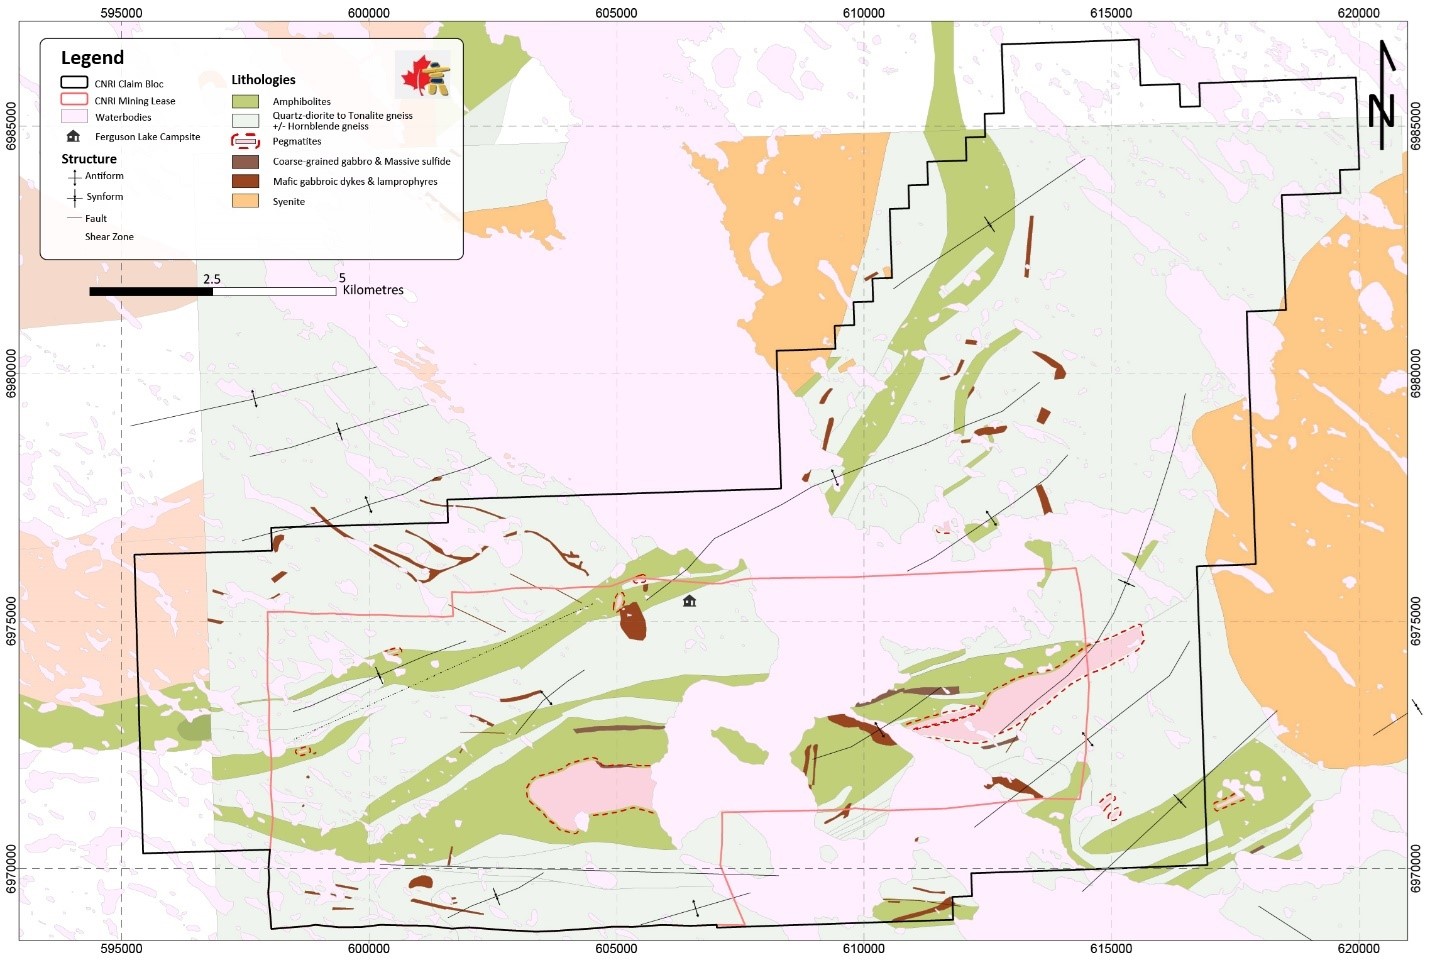 Regional Geology and occurrences of pegmatites (in pink color) at the Ferguson Lake project